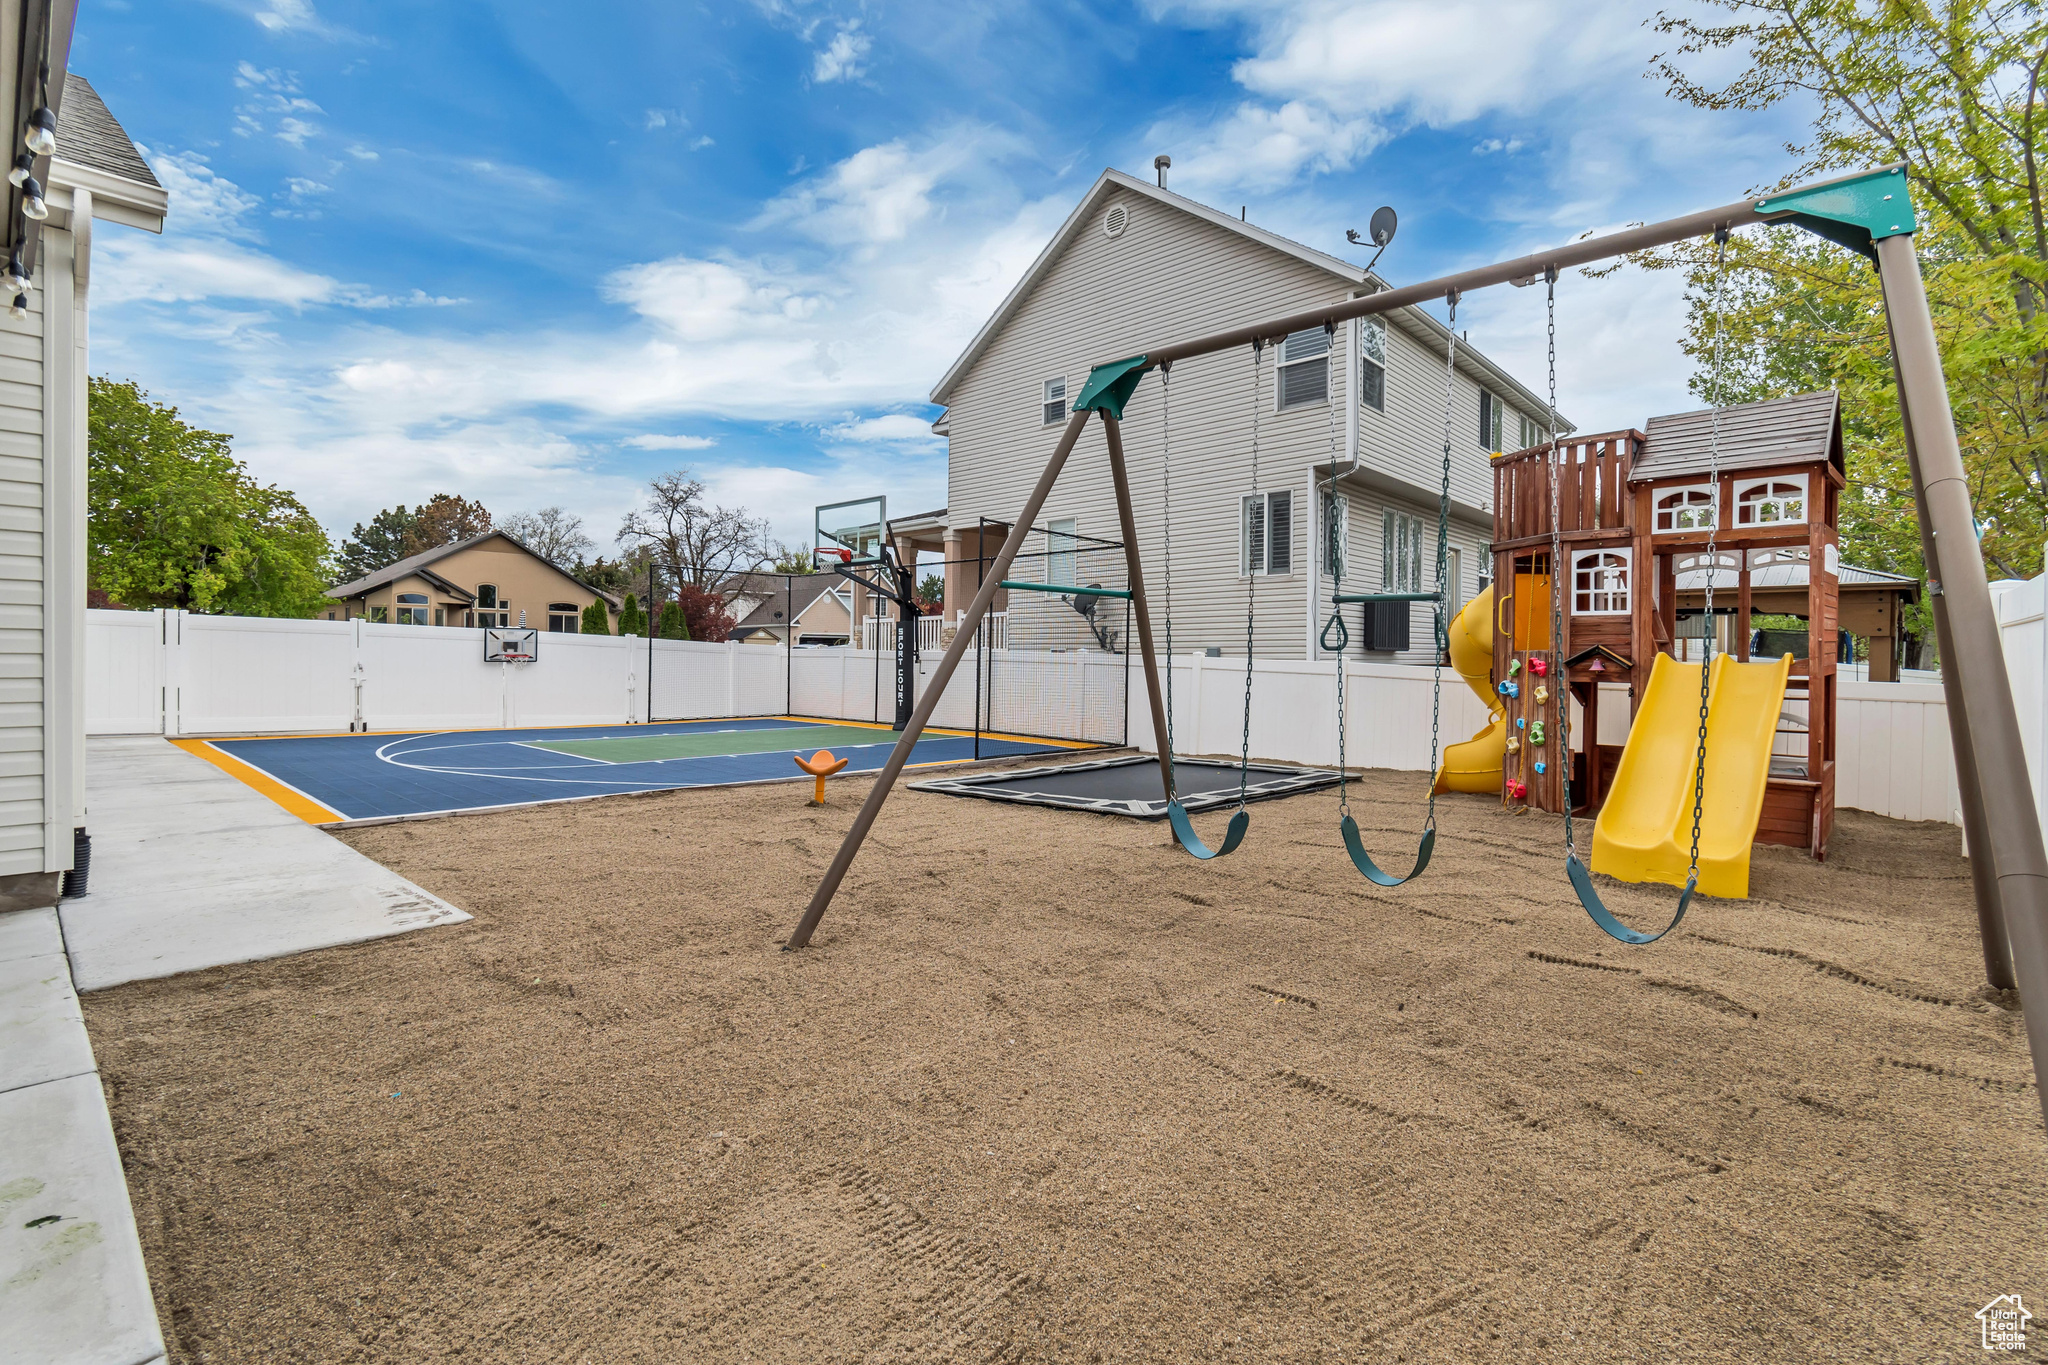 View of playground featuring basketball hoop